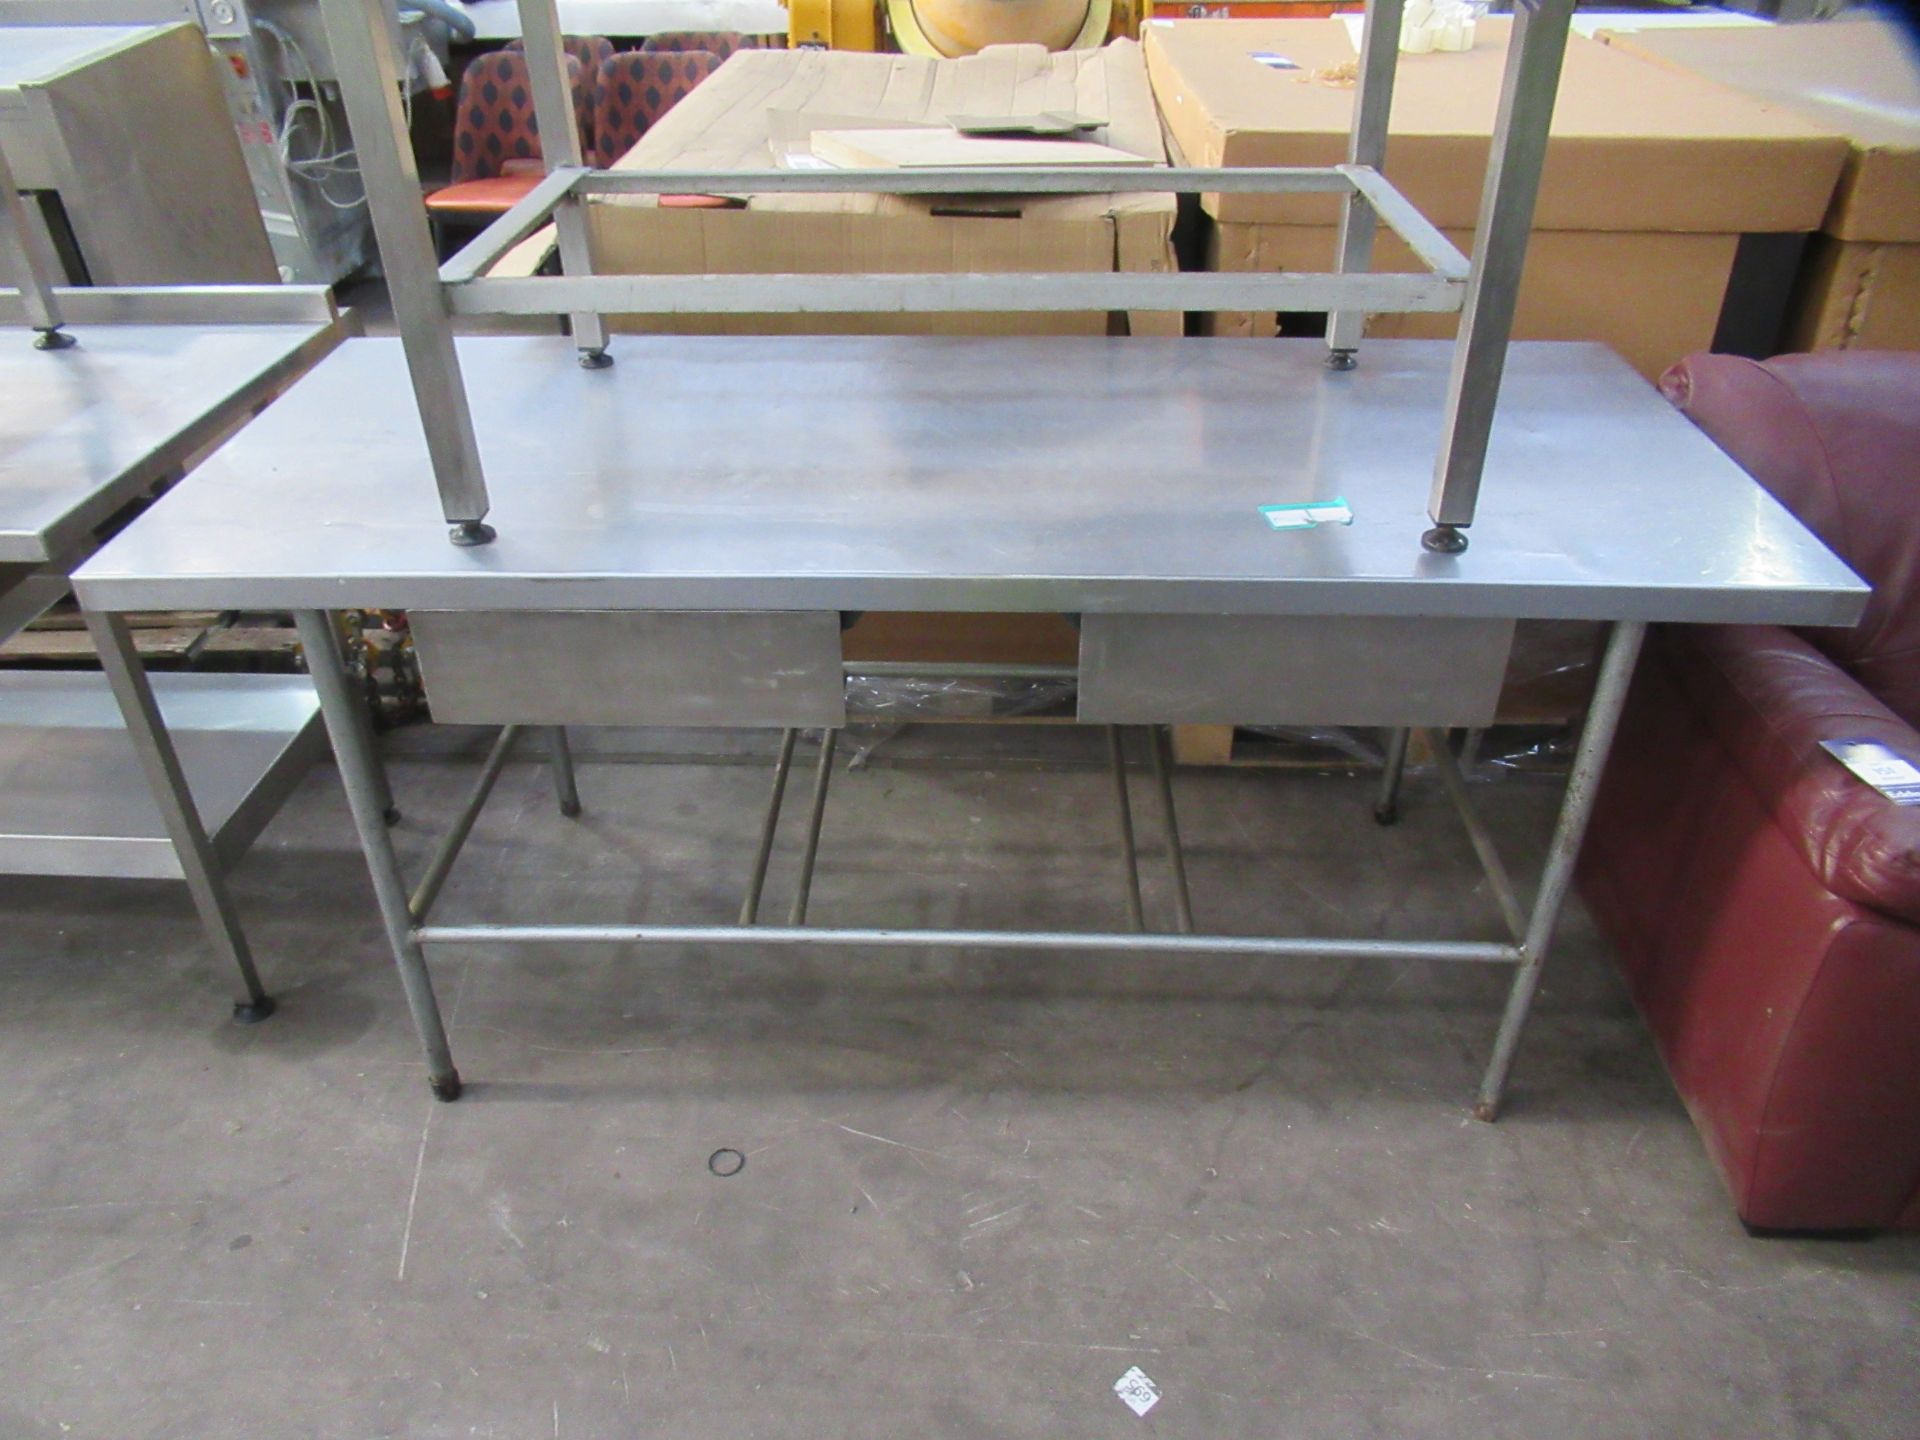 2x Stainless Steel Prep Tables - 1 with Drawers - Image 3 of 4